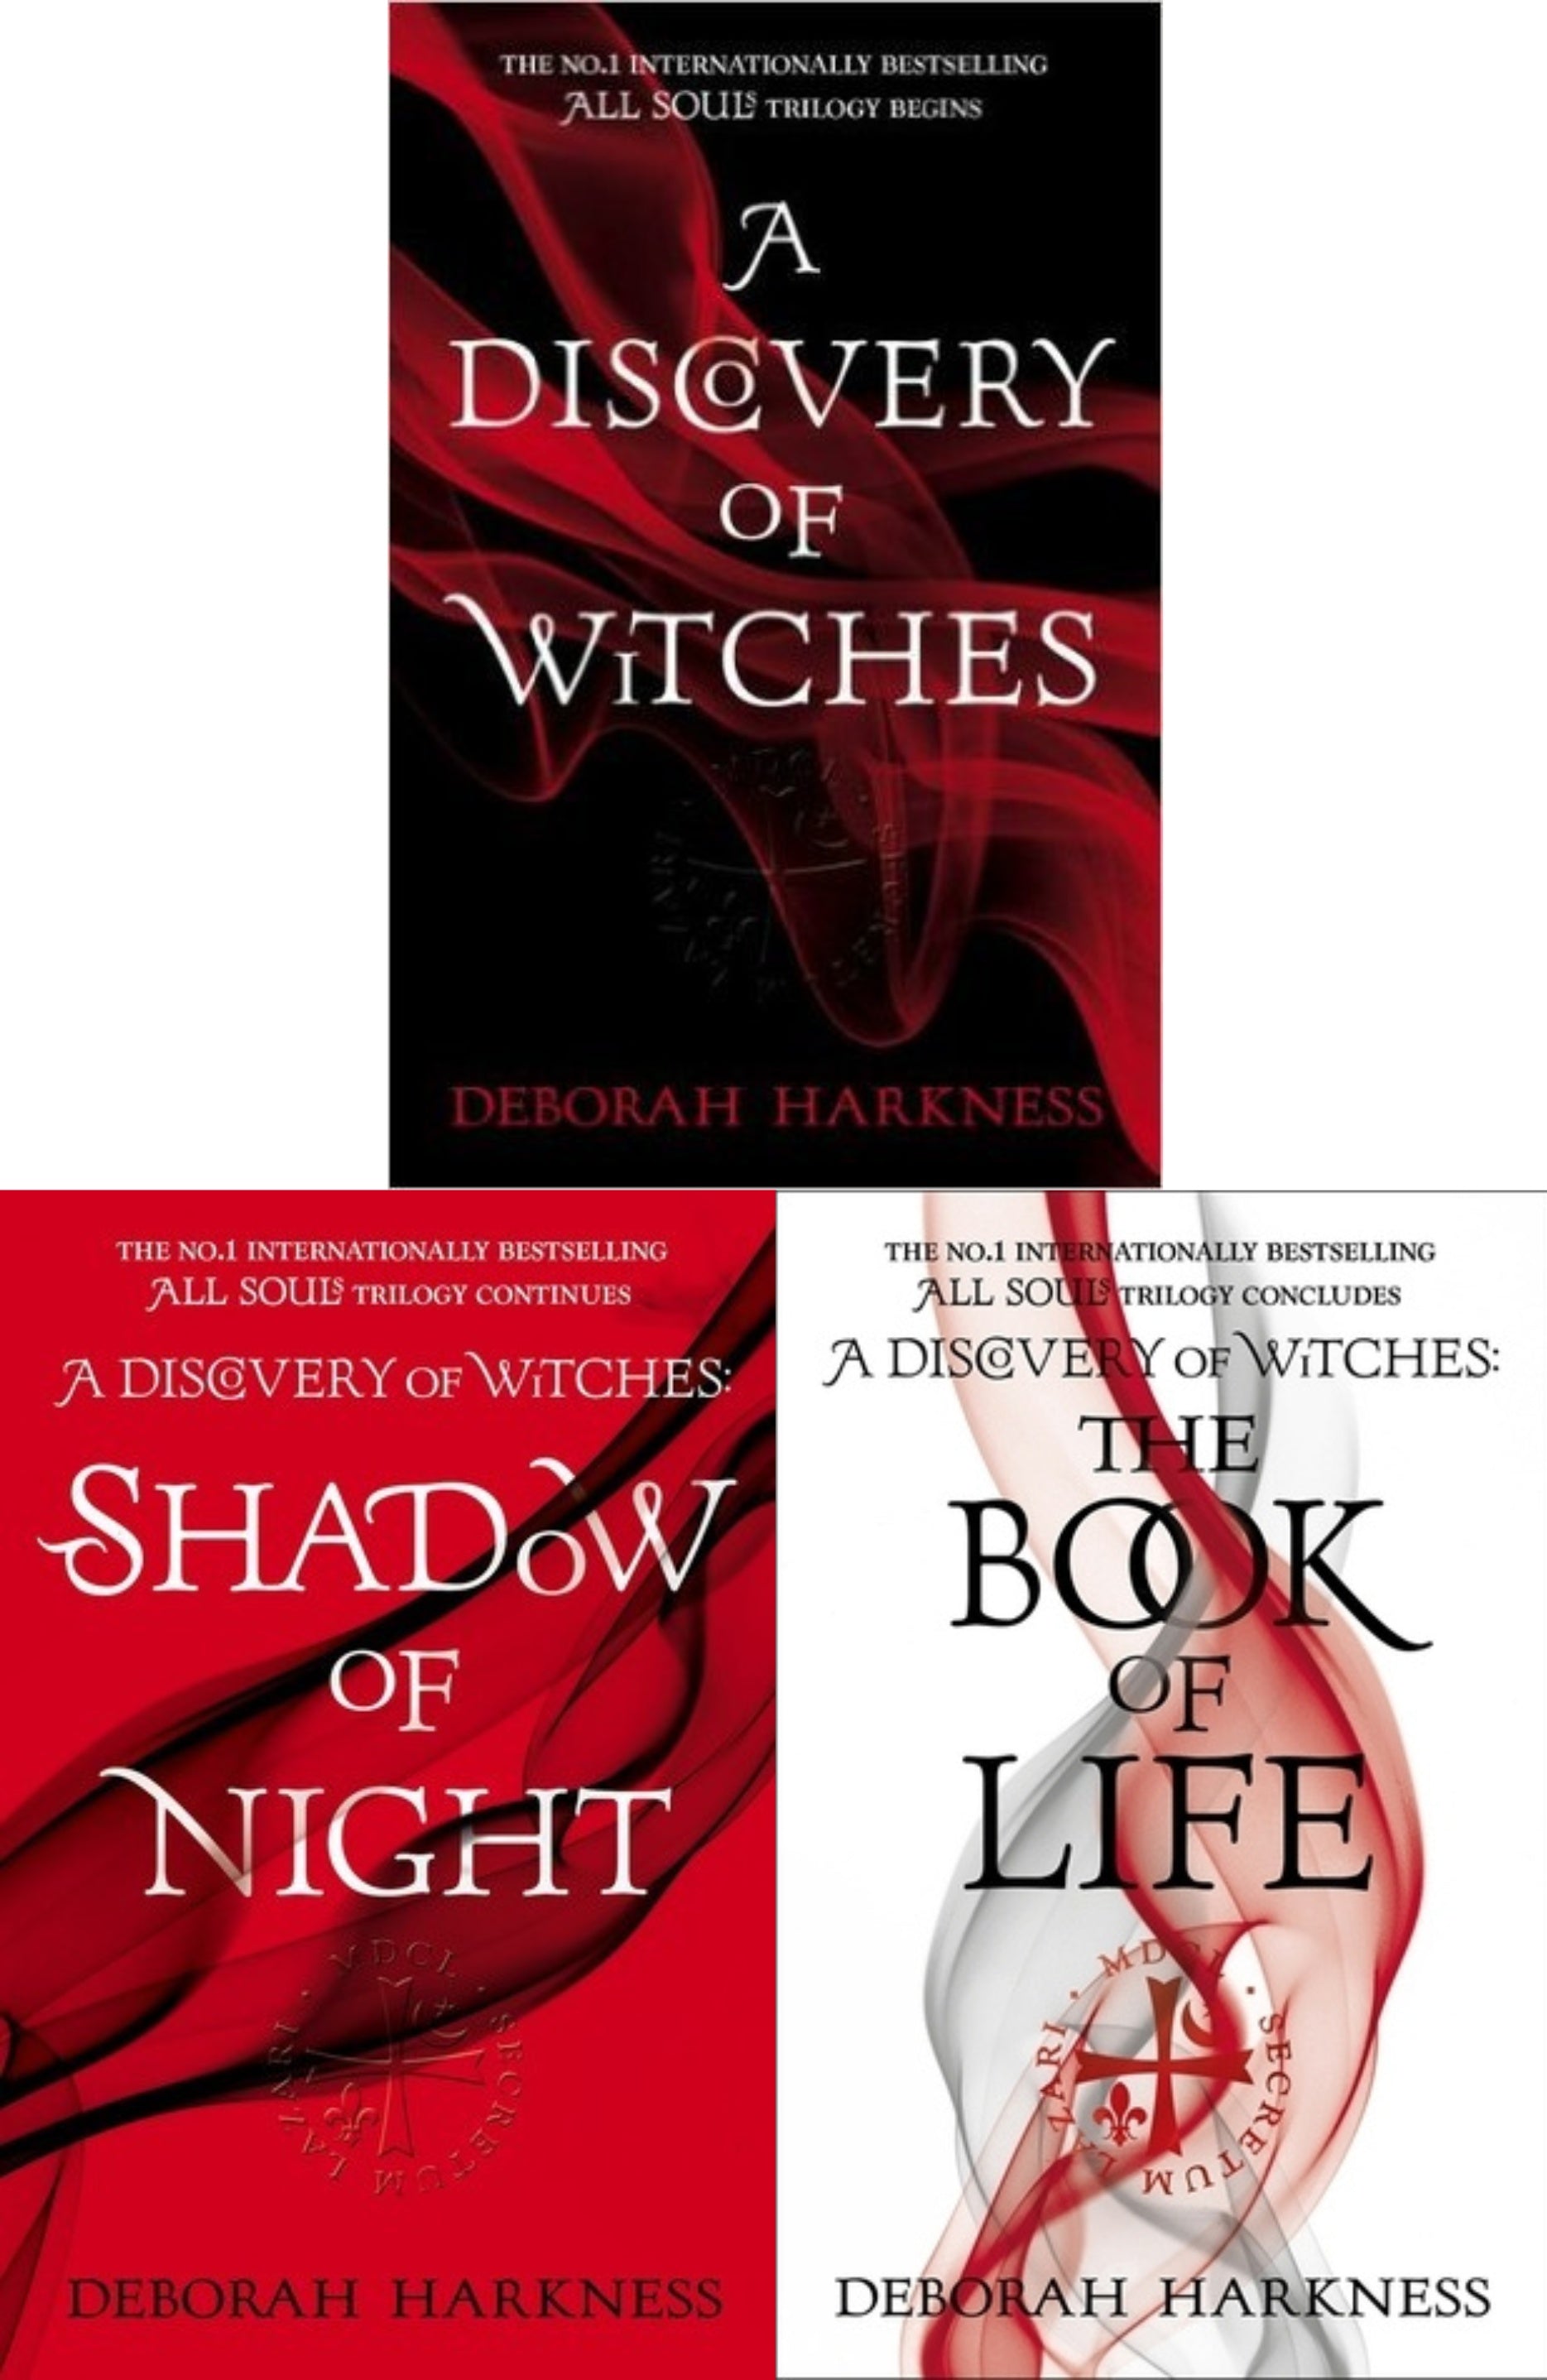 The All Souls Trilogy Bestseller Book Combo ( A Discovery of Witches, The Book of Life , Shadow of Night )